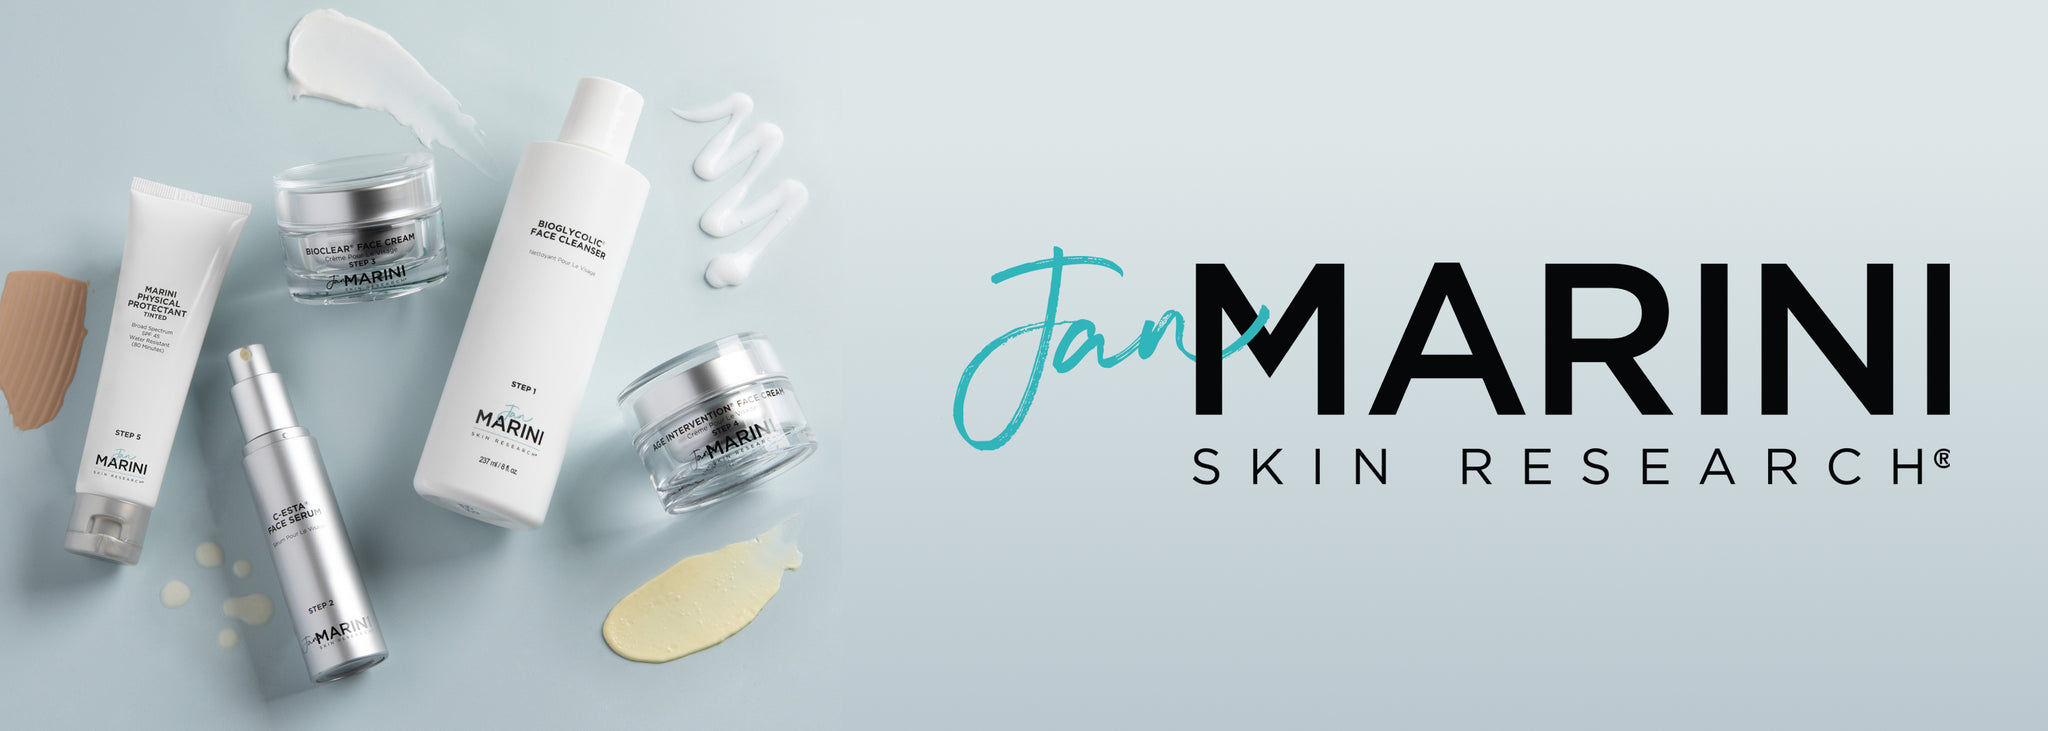 Several Jan Marini skincare products laying on a pale blue background with the Jan Marini Skincare Research logo to the right.